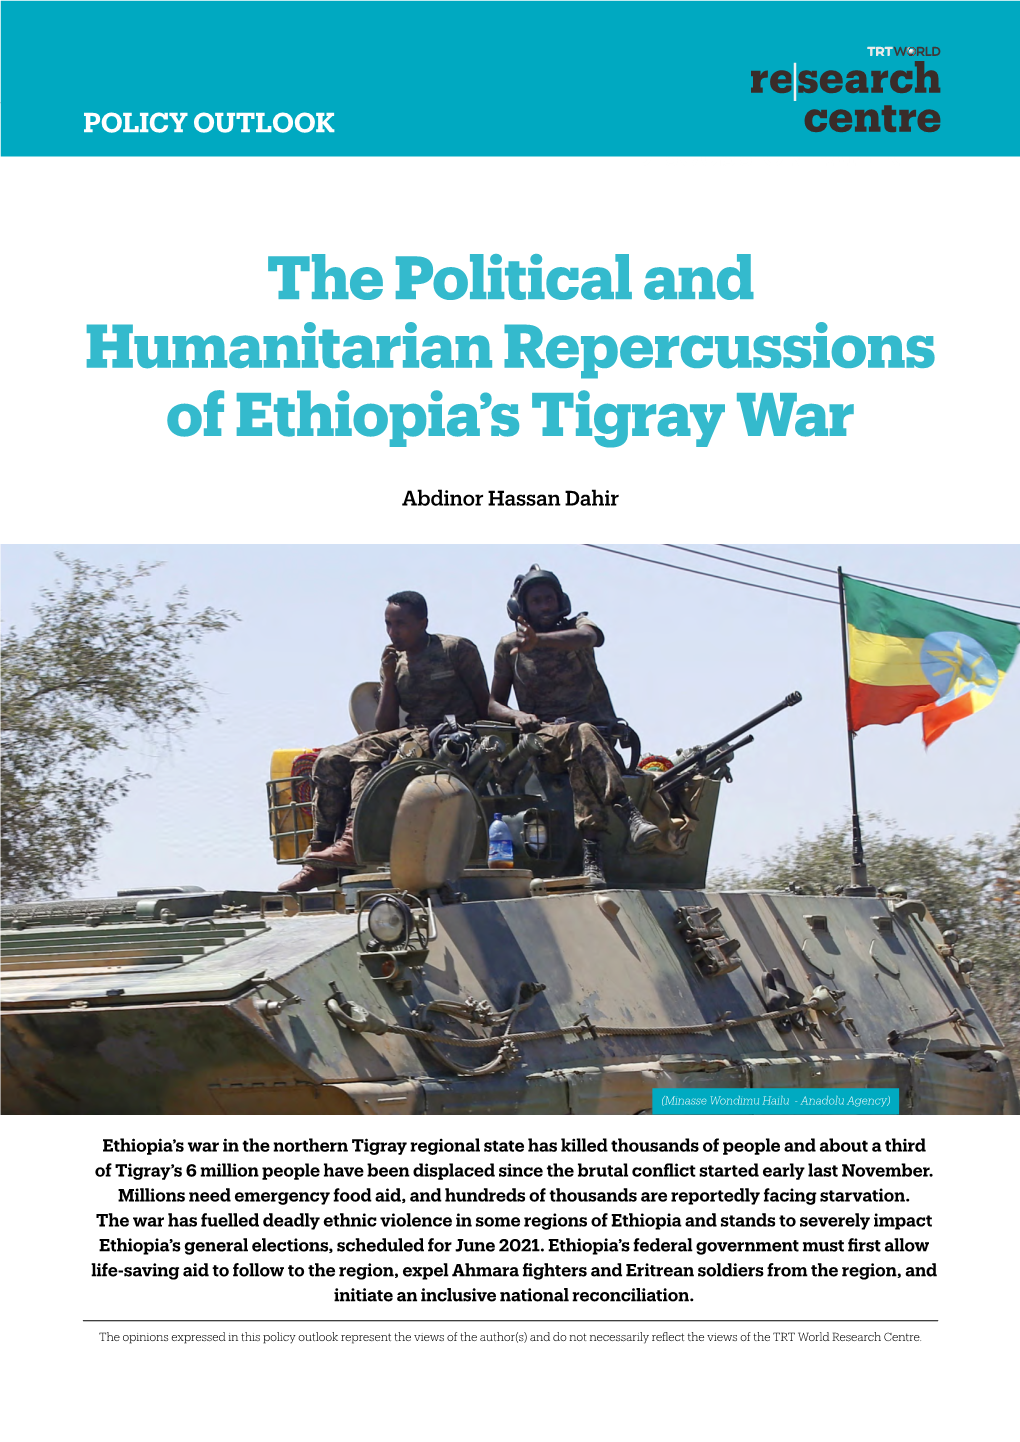 The Political and Humanitarian Repercussions of Ethiopia's Tigray